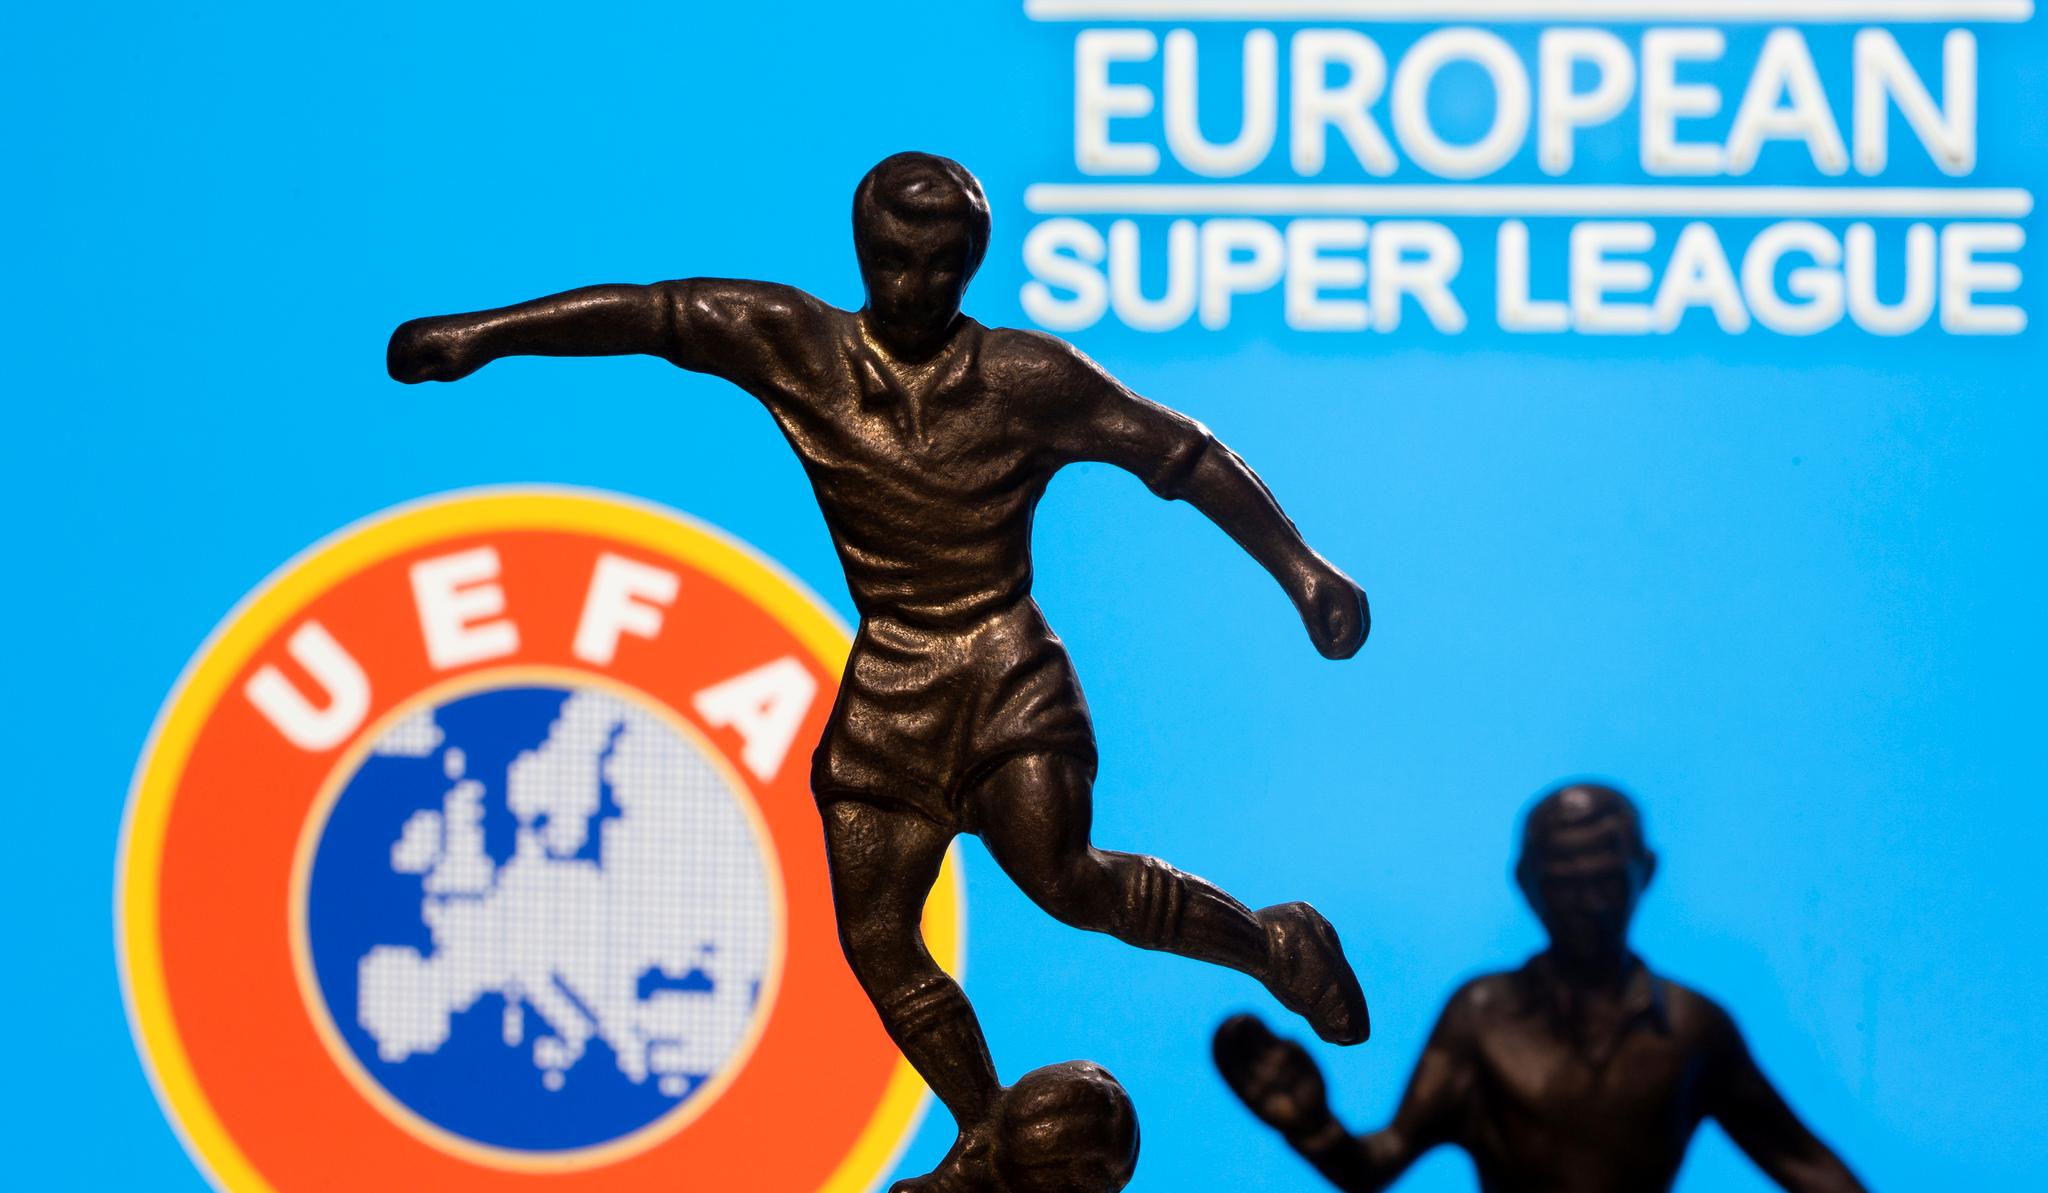 A new blow for the “Super League” – UEFA wins in the EU courts